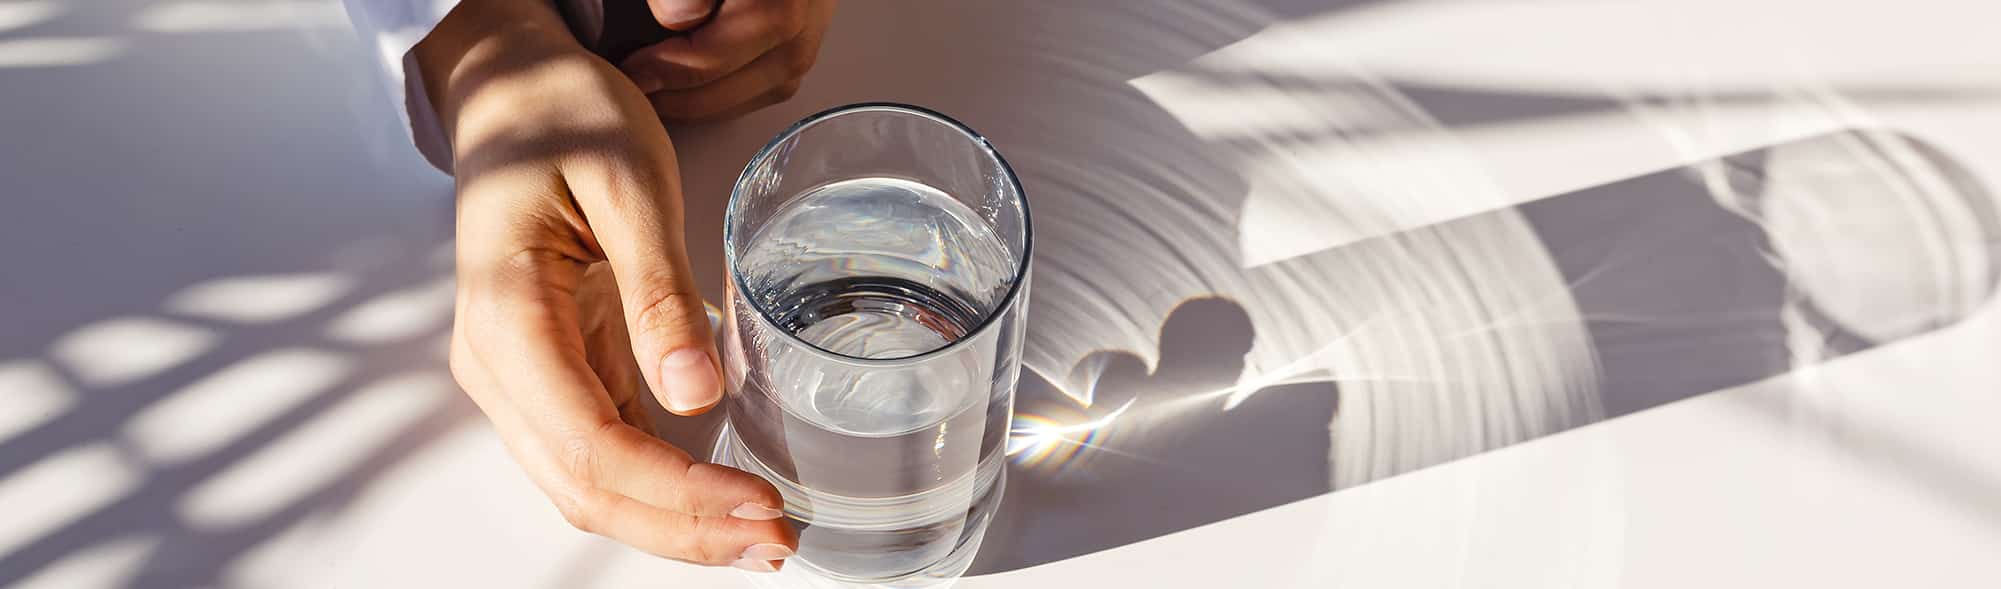 Woman's hands and a glass of clean water on the white table in natural sunlight with plant shadows.